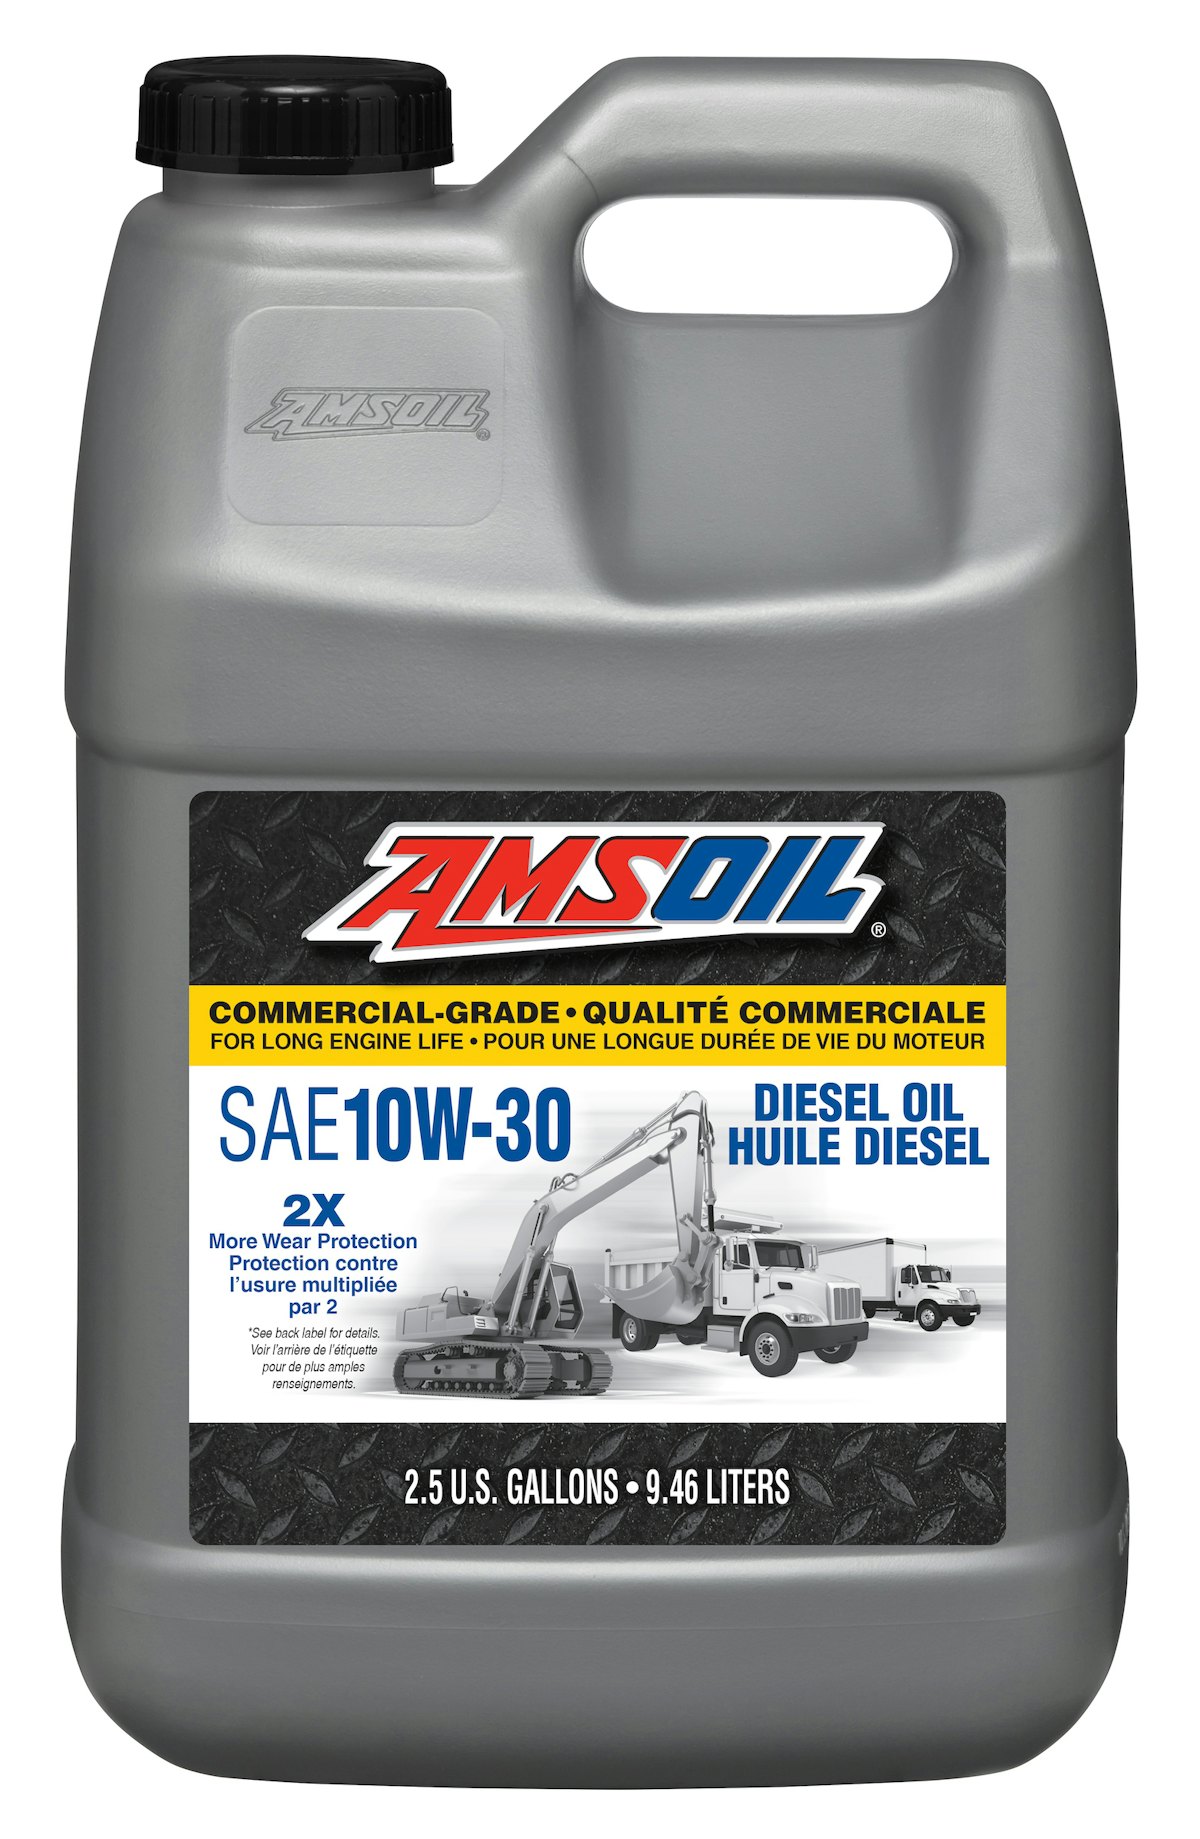 AMSOIL launches new low-viscosity grade motor oils in Europe - F&L